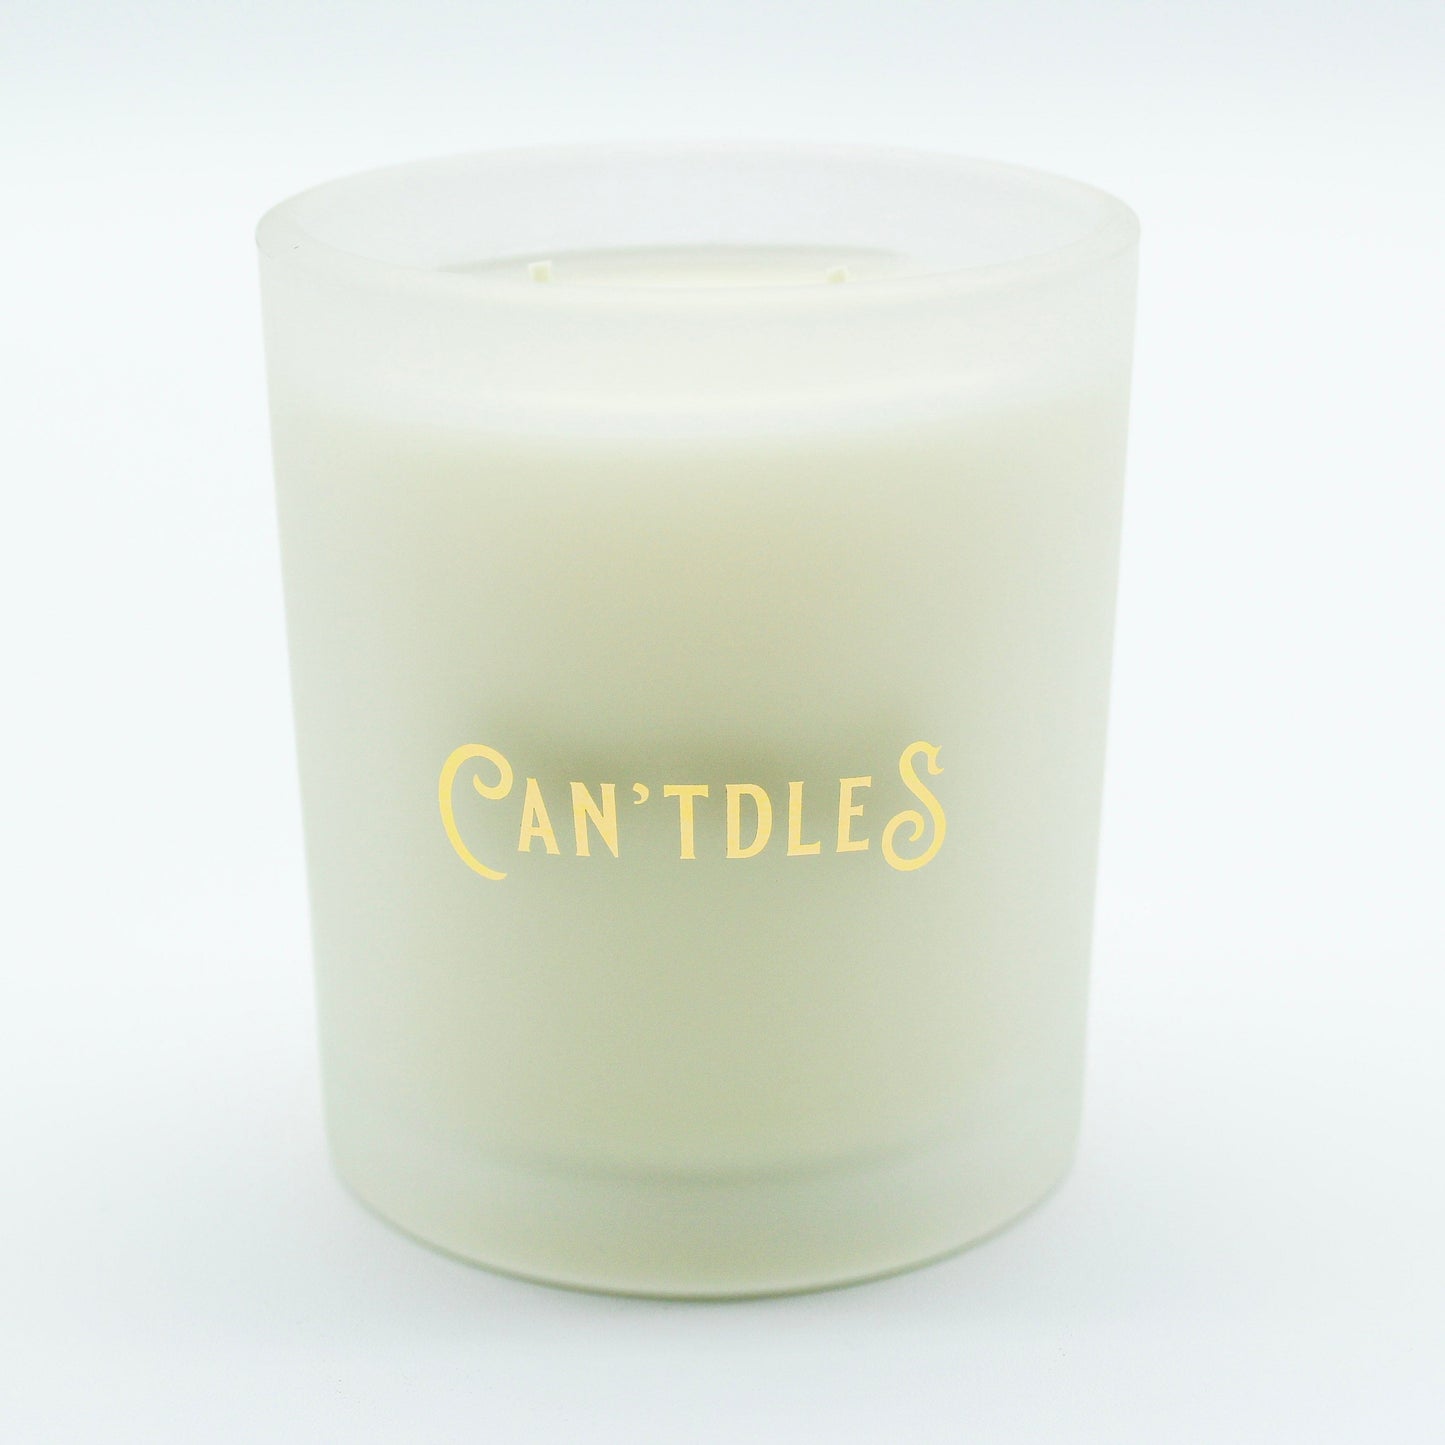 Can'tdles Candles I Don't Know, Margo: Spiked Eggnog Christmas Candle